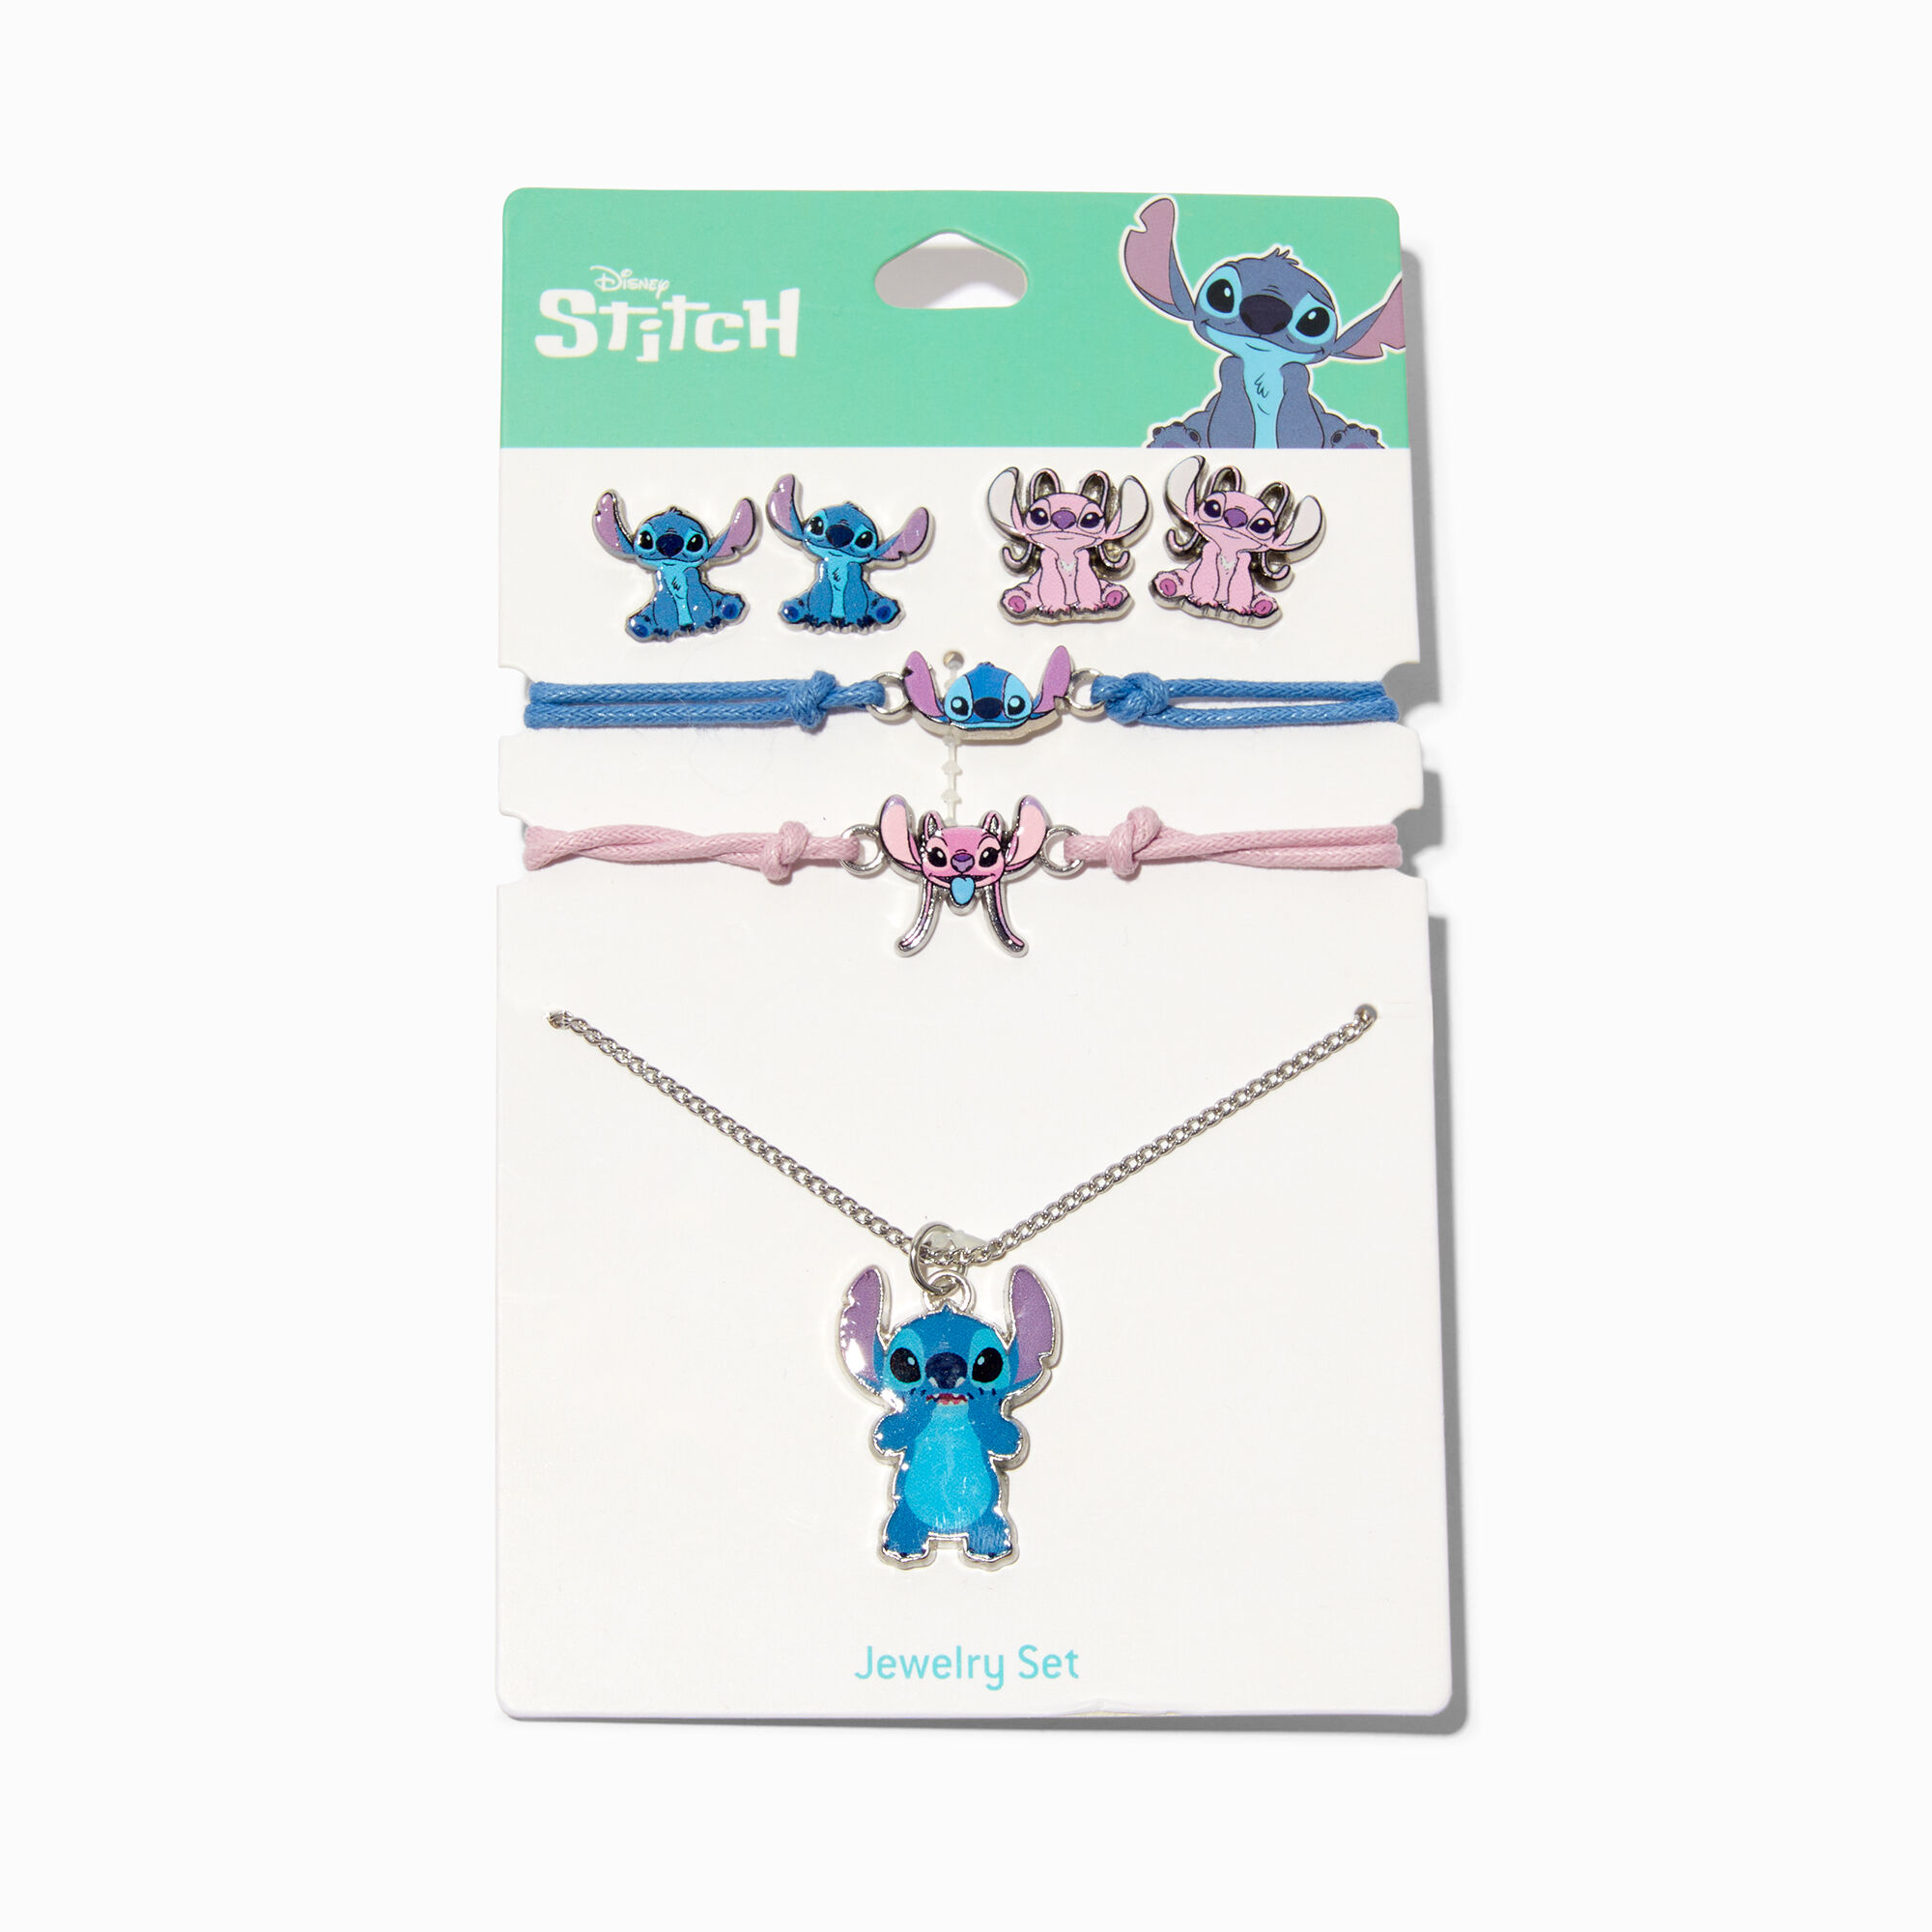 View Claires Disney Stitch Jewelry Set 5 Pack Silver information